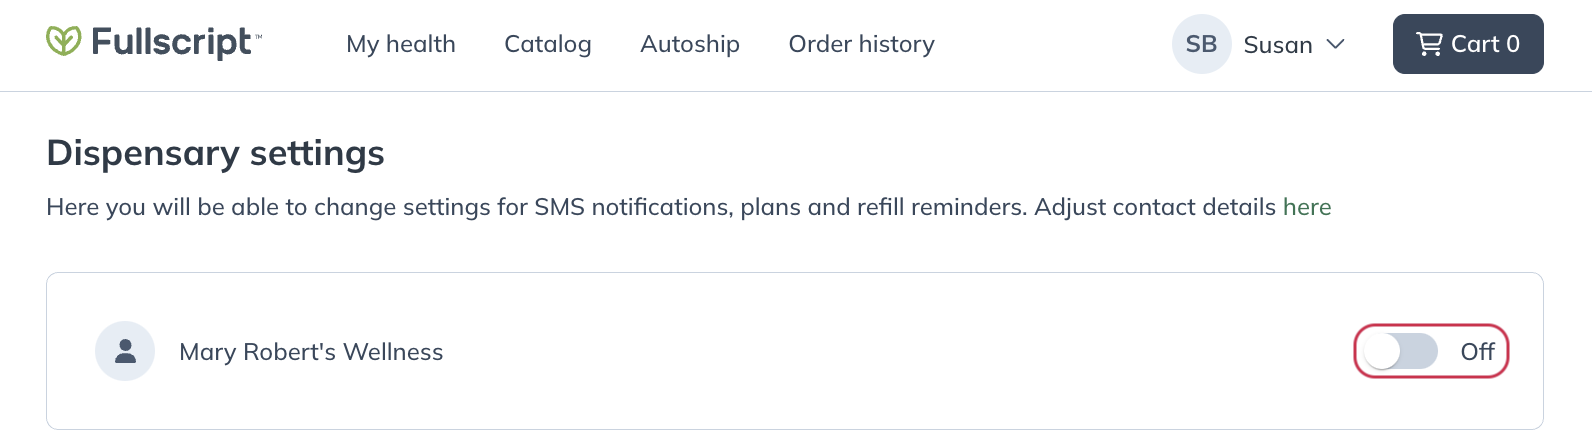 Unsubscribe from all email reminders by toggling the above switch to Off